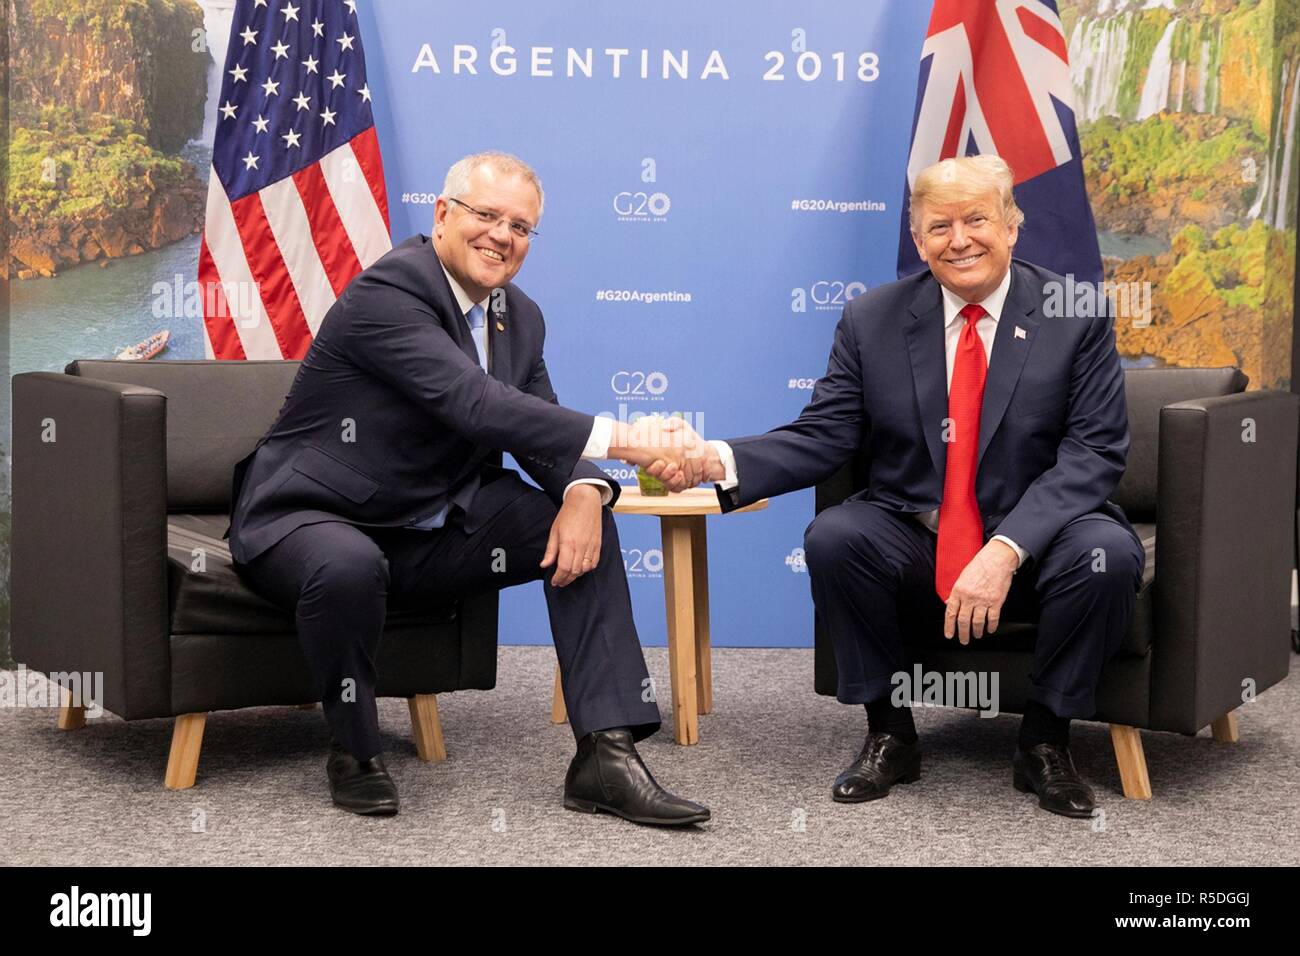 Buenos Aires, Argentina. 1st December, 2018. Buenos Aires, Argentina. 30th November 2018. U.S. President Donald Trump shakes hands with Australian Prime Minister Scott Morrison during a bilateral meeting on the sidelines of the G20 Summit meeting at the Costa Salguero Center November 30, 2018 in Buenos Aires, Argentina. Credit: Planetpix/Alamy Live News Credit: Planetpix/Alamy Live News Stock Photo